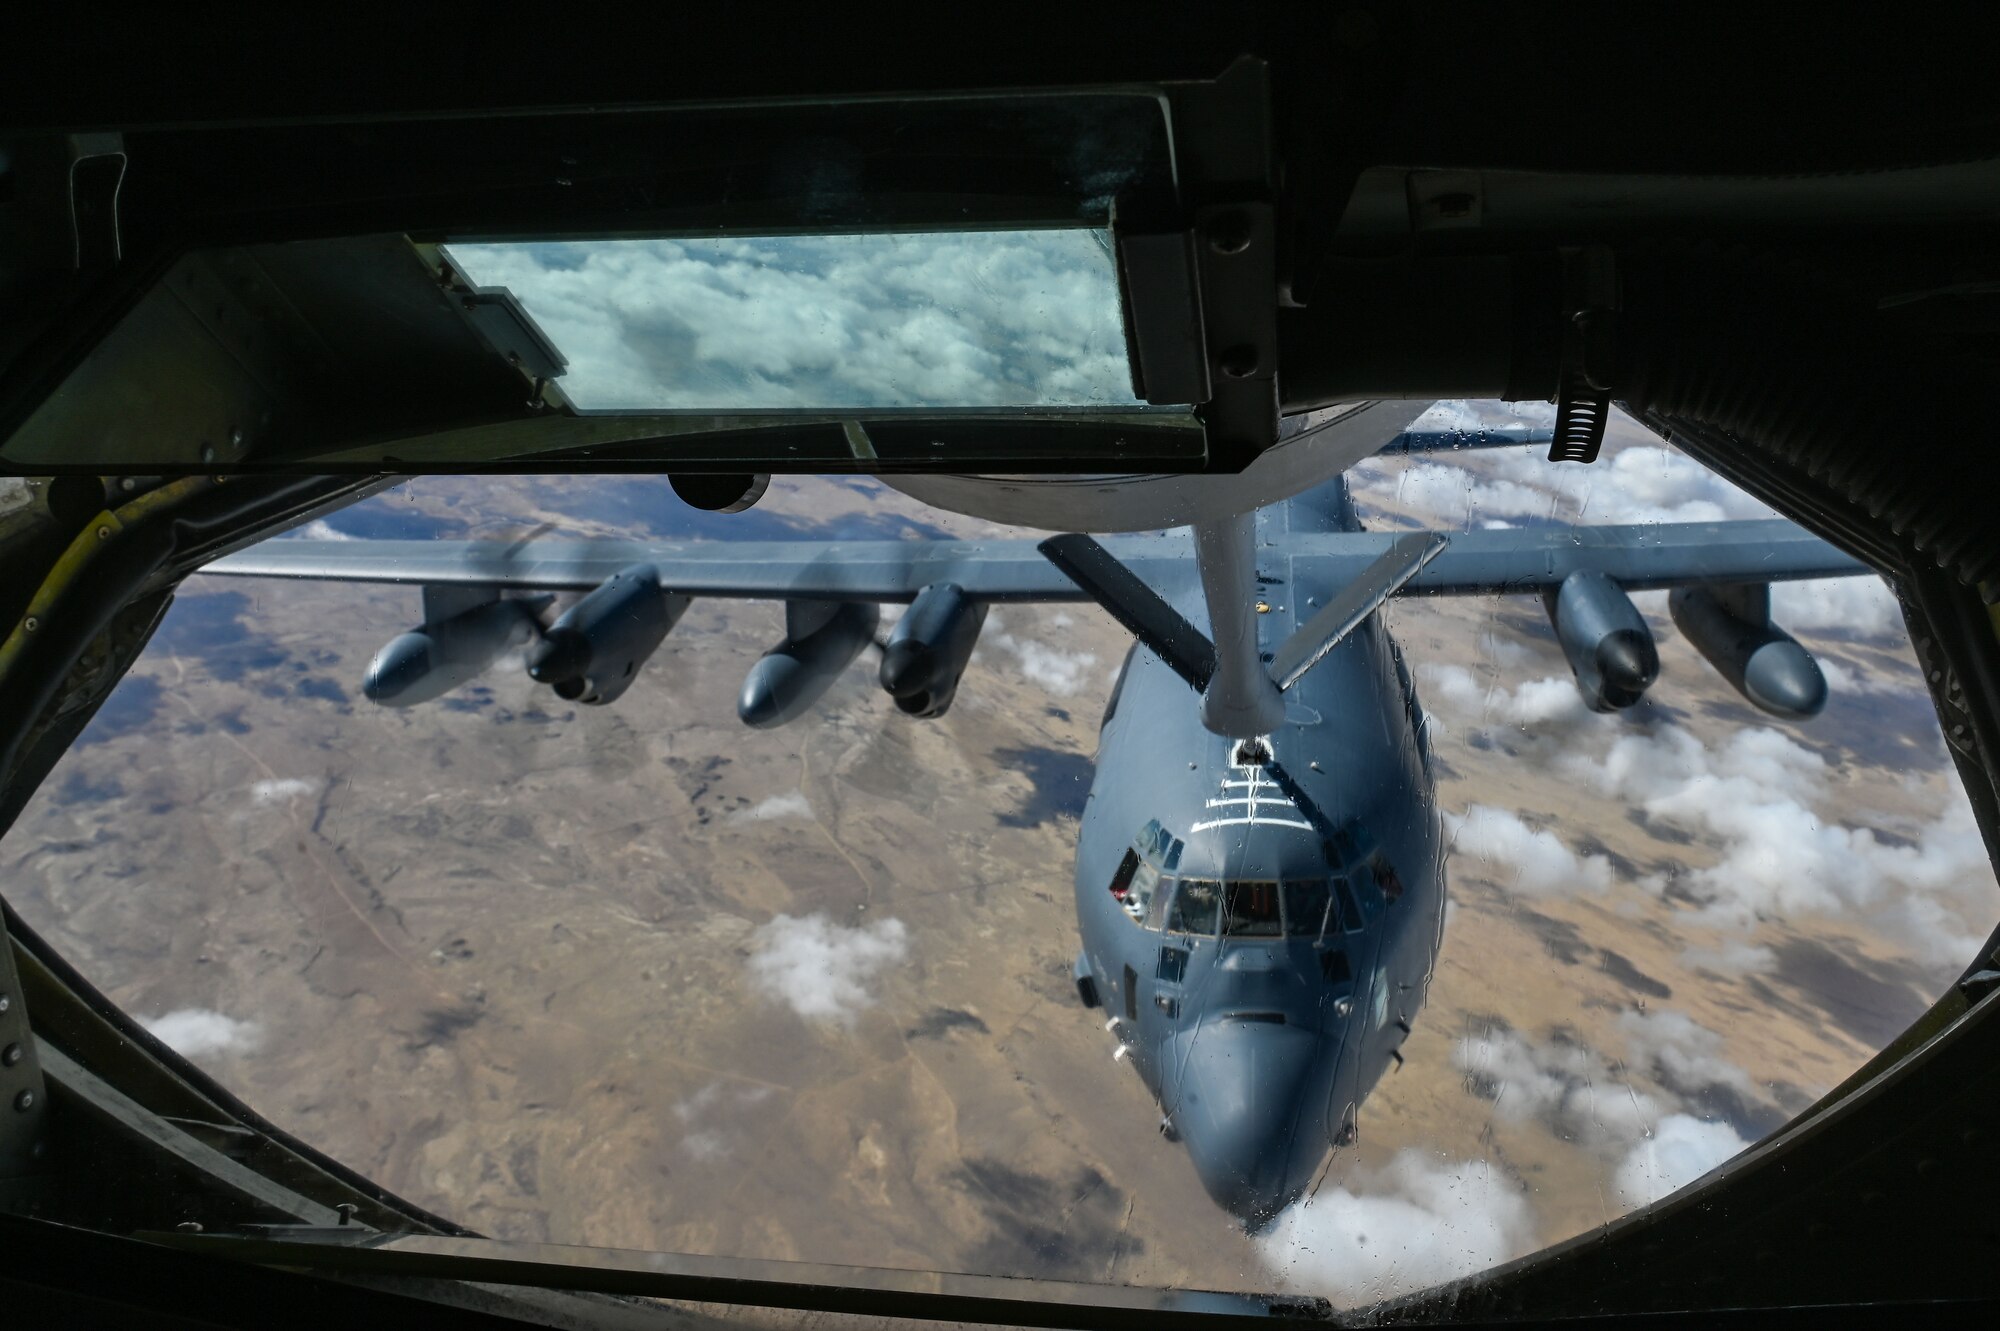 A U.S. Air Force KC-135 Stratotanker refuels a HC-130J during an endurance exercise at Roswell, New Mexico, Feb. 17, 2023. The exercise emphasized aircrew endurance, dynamic air refueling concepts, testing of a variety of the KC-135 mission sets, and included an advanced 72-hour endurance event. (U.S. Air Force photo by Airman 1st Class Haiden Morris)